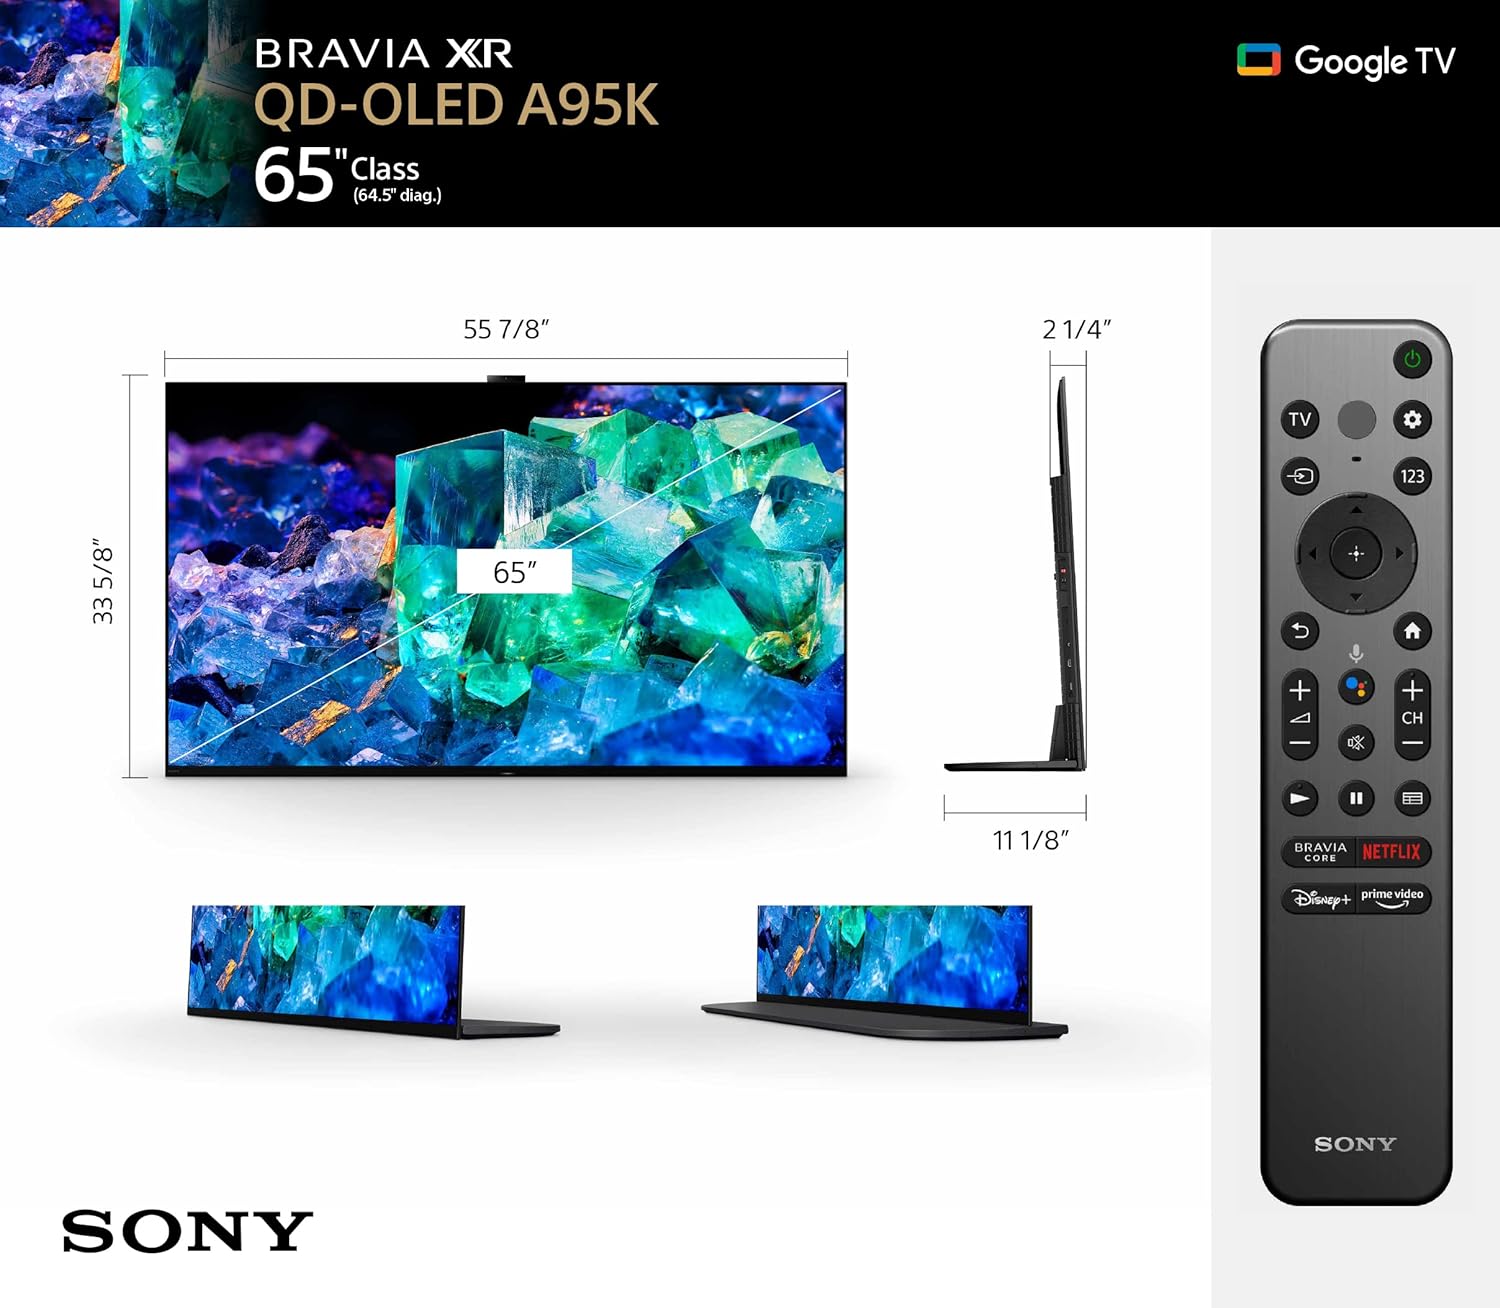 Sony XR-65A95K 65 inch BRAVIA XR OLED 4K Ultra HD HDR QD-OLED Smart Google TV with Dolby Vision & Atmos (Refurbished)